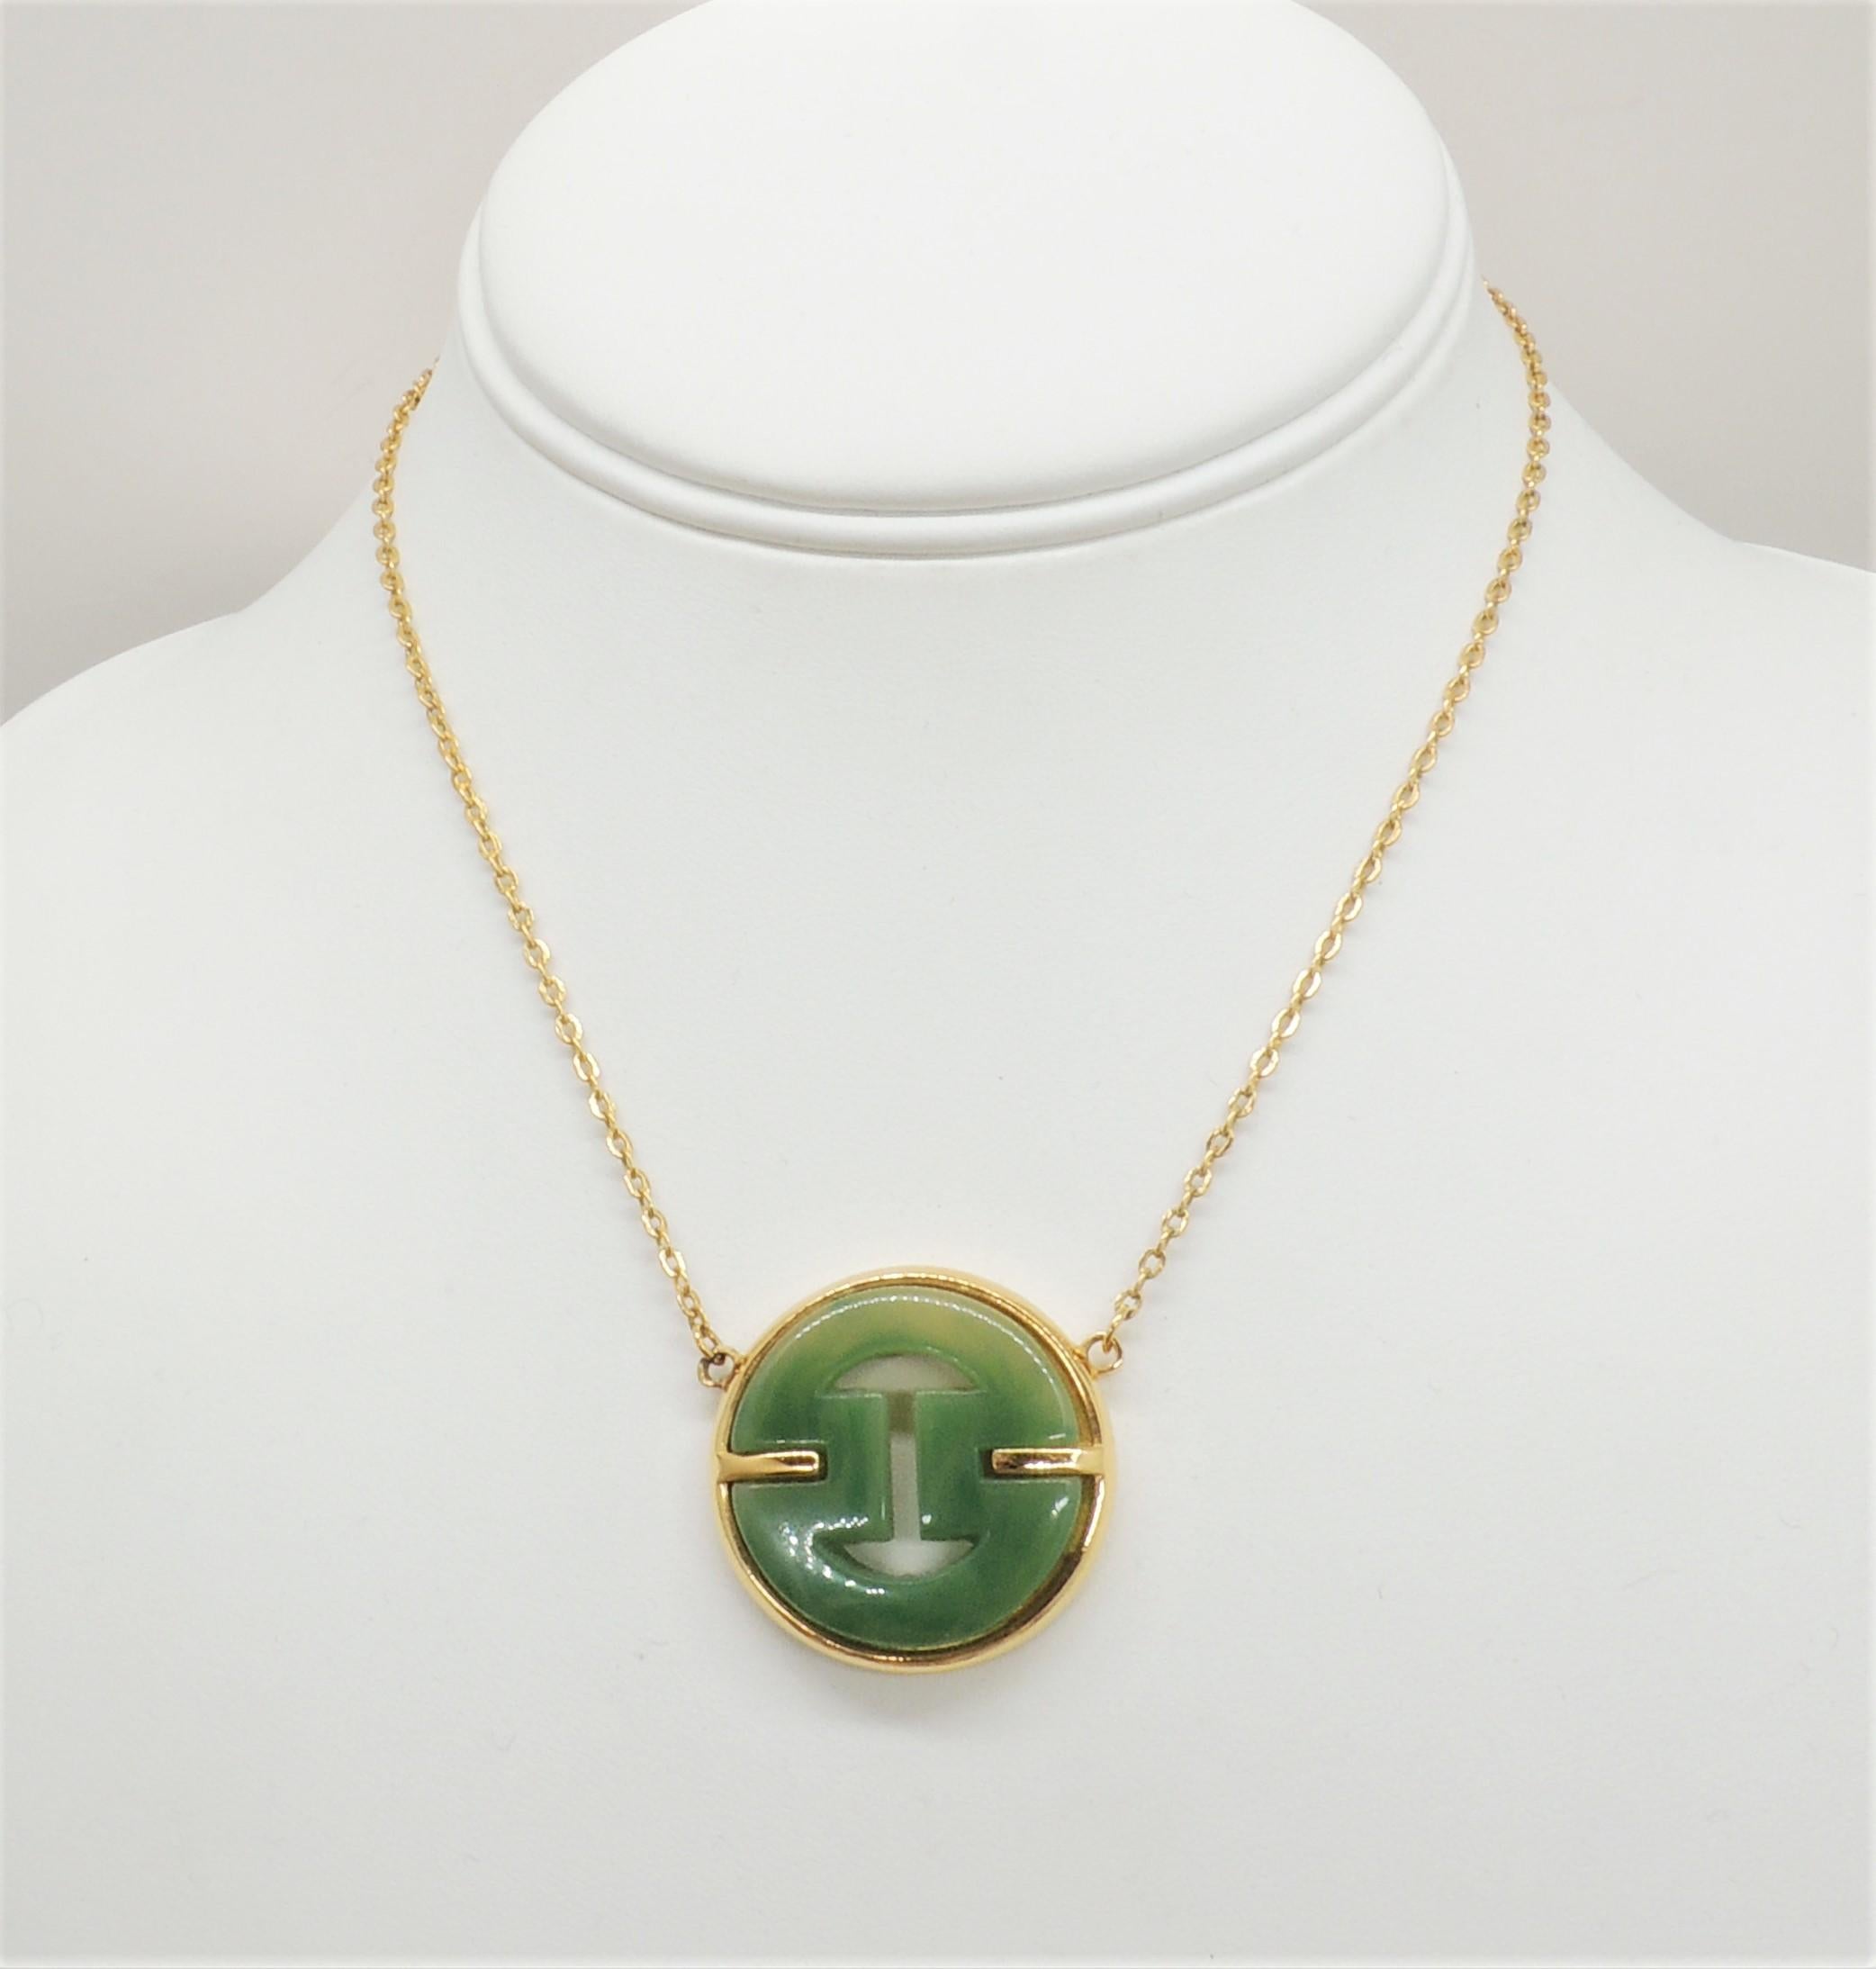 Goldtone Asian inspired faux-jade pendant necklace with spring ring clasp. Marked 